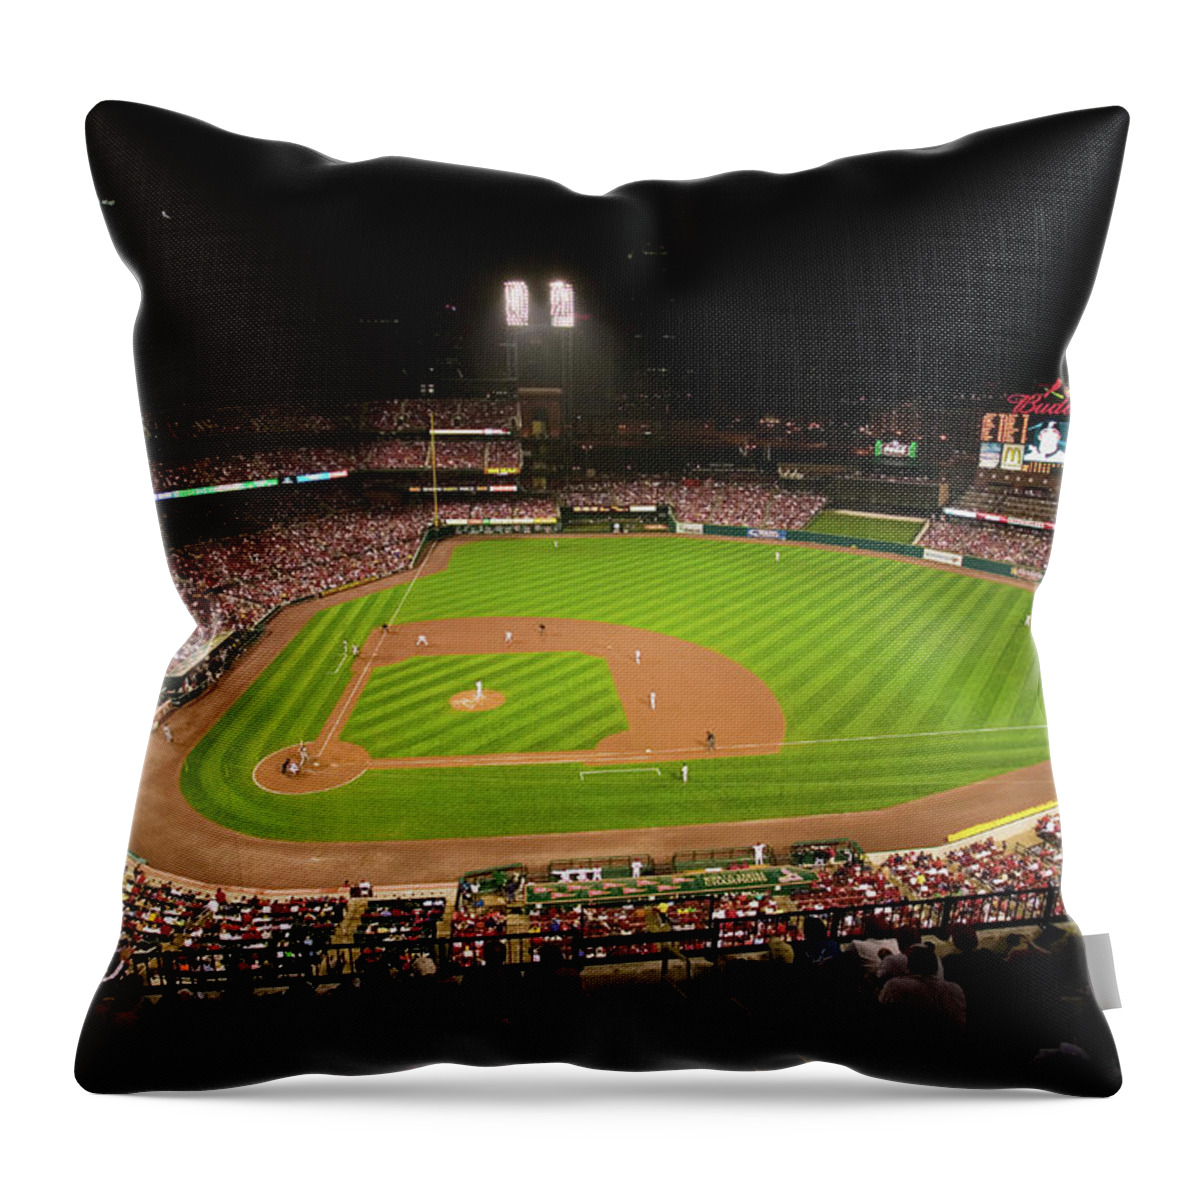 Photography Throw Pillow featuring the photograph In A Night Game And A Light Rain Mist by Panoramic Images